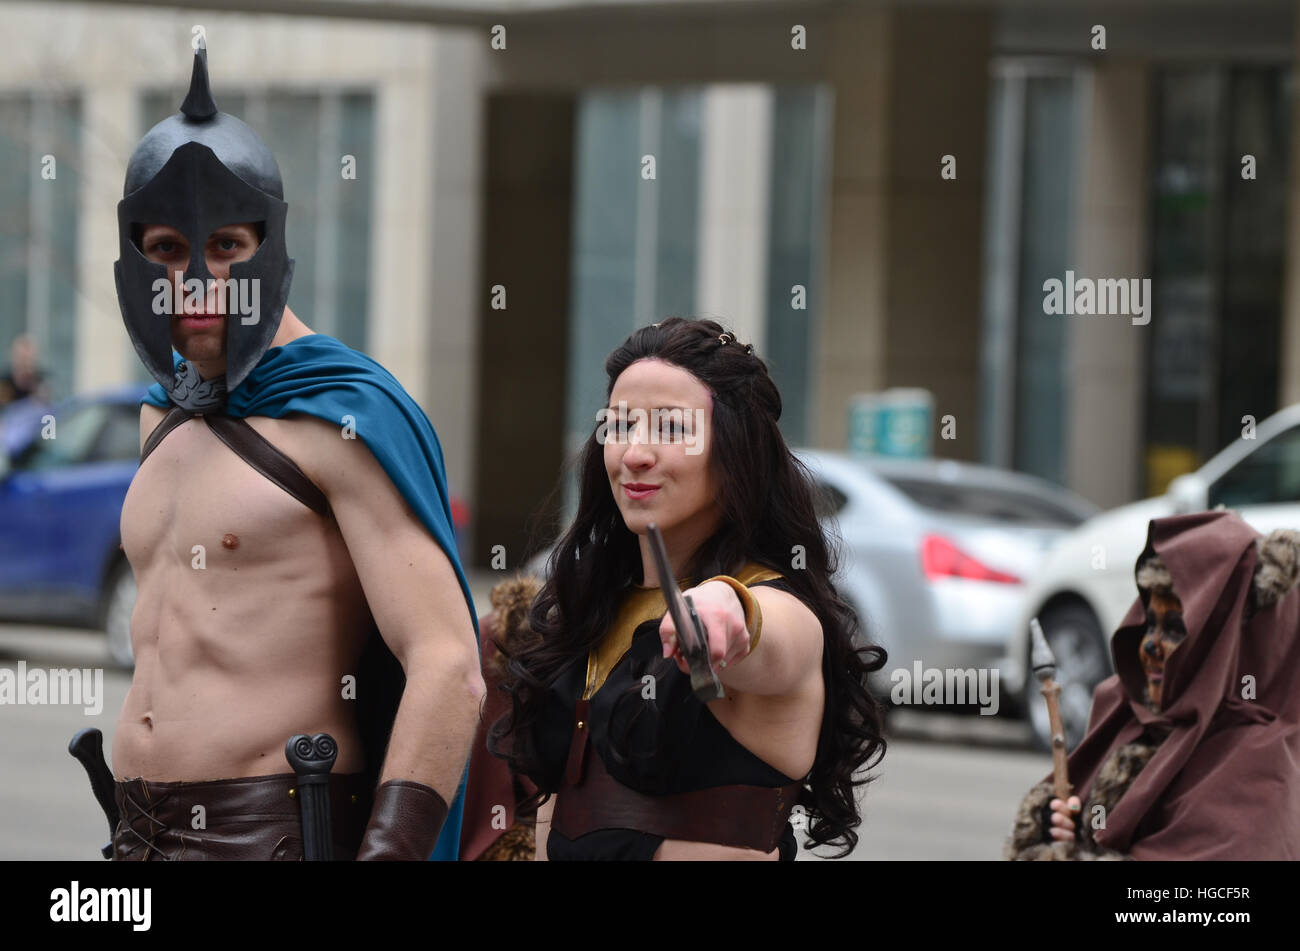 Calgary, Alberta, Canada, April 24 2014: Comic and Entertainment Expo Parade Characters from the movie 300 Stock Photo